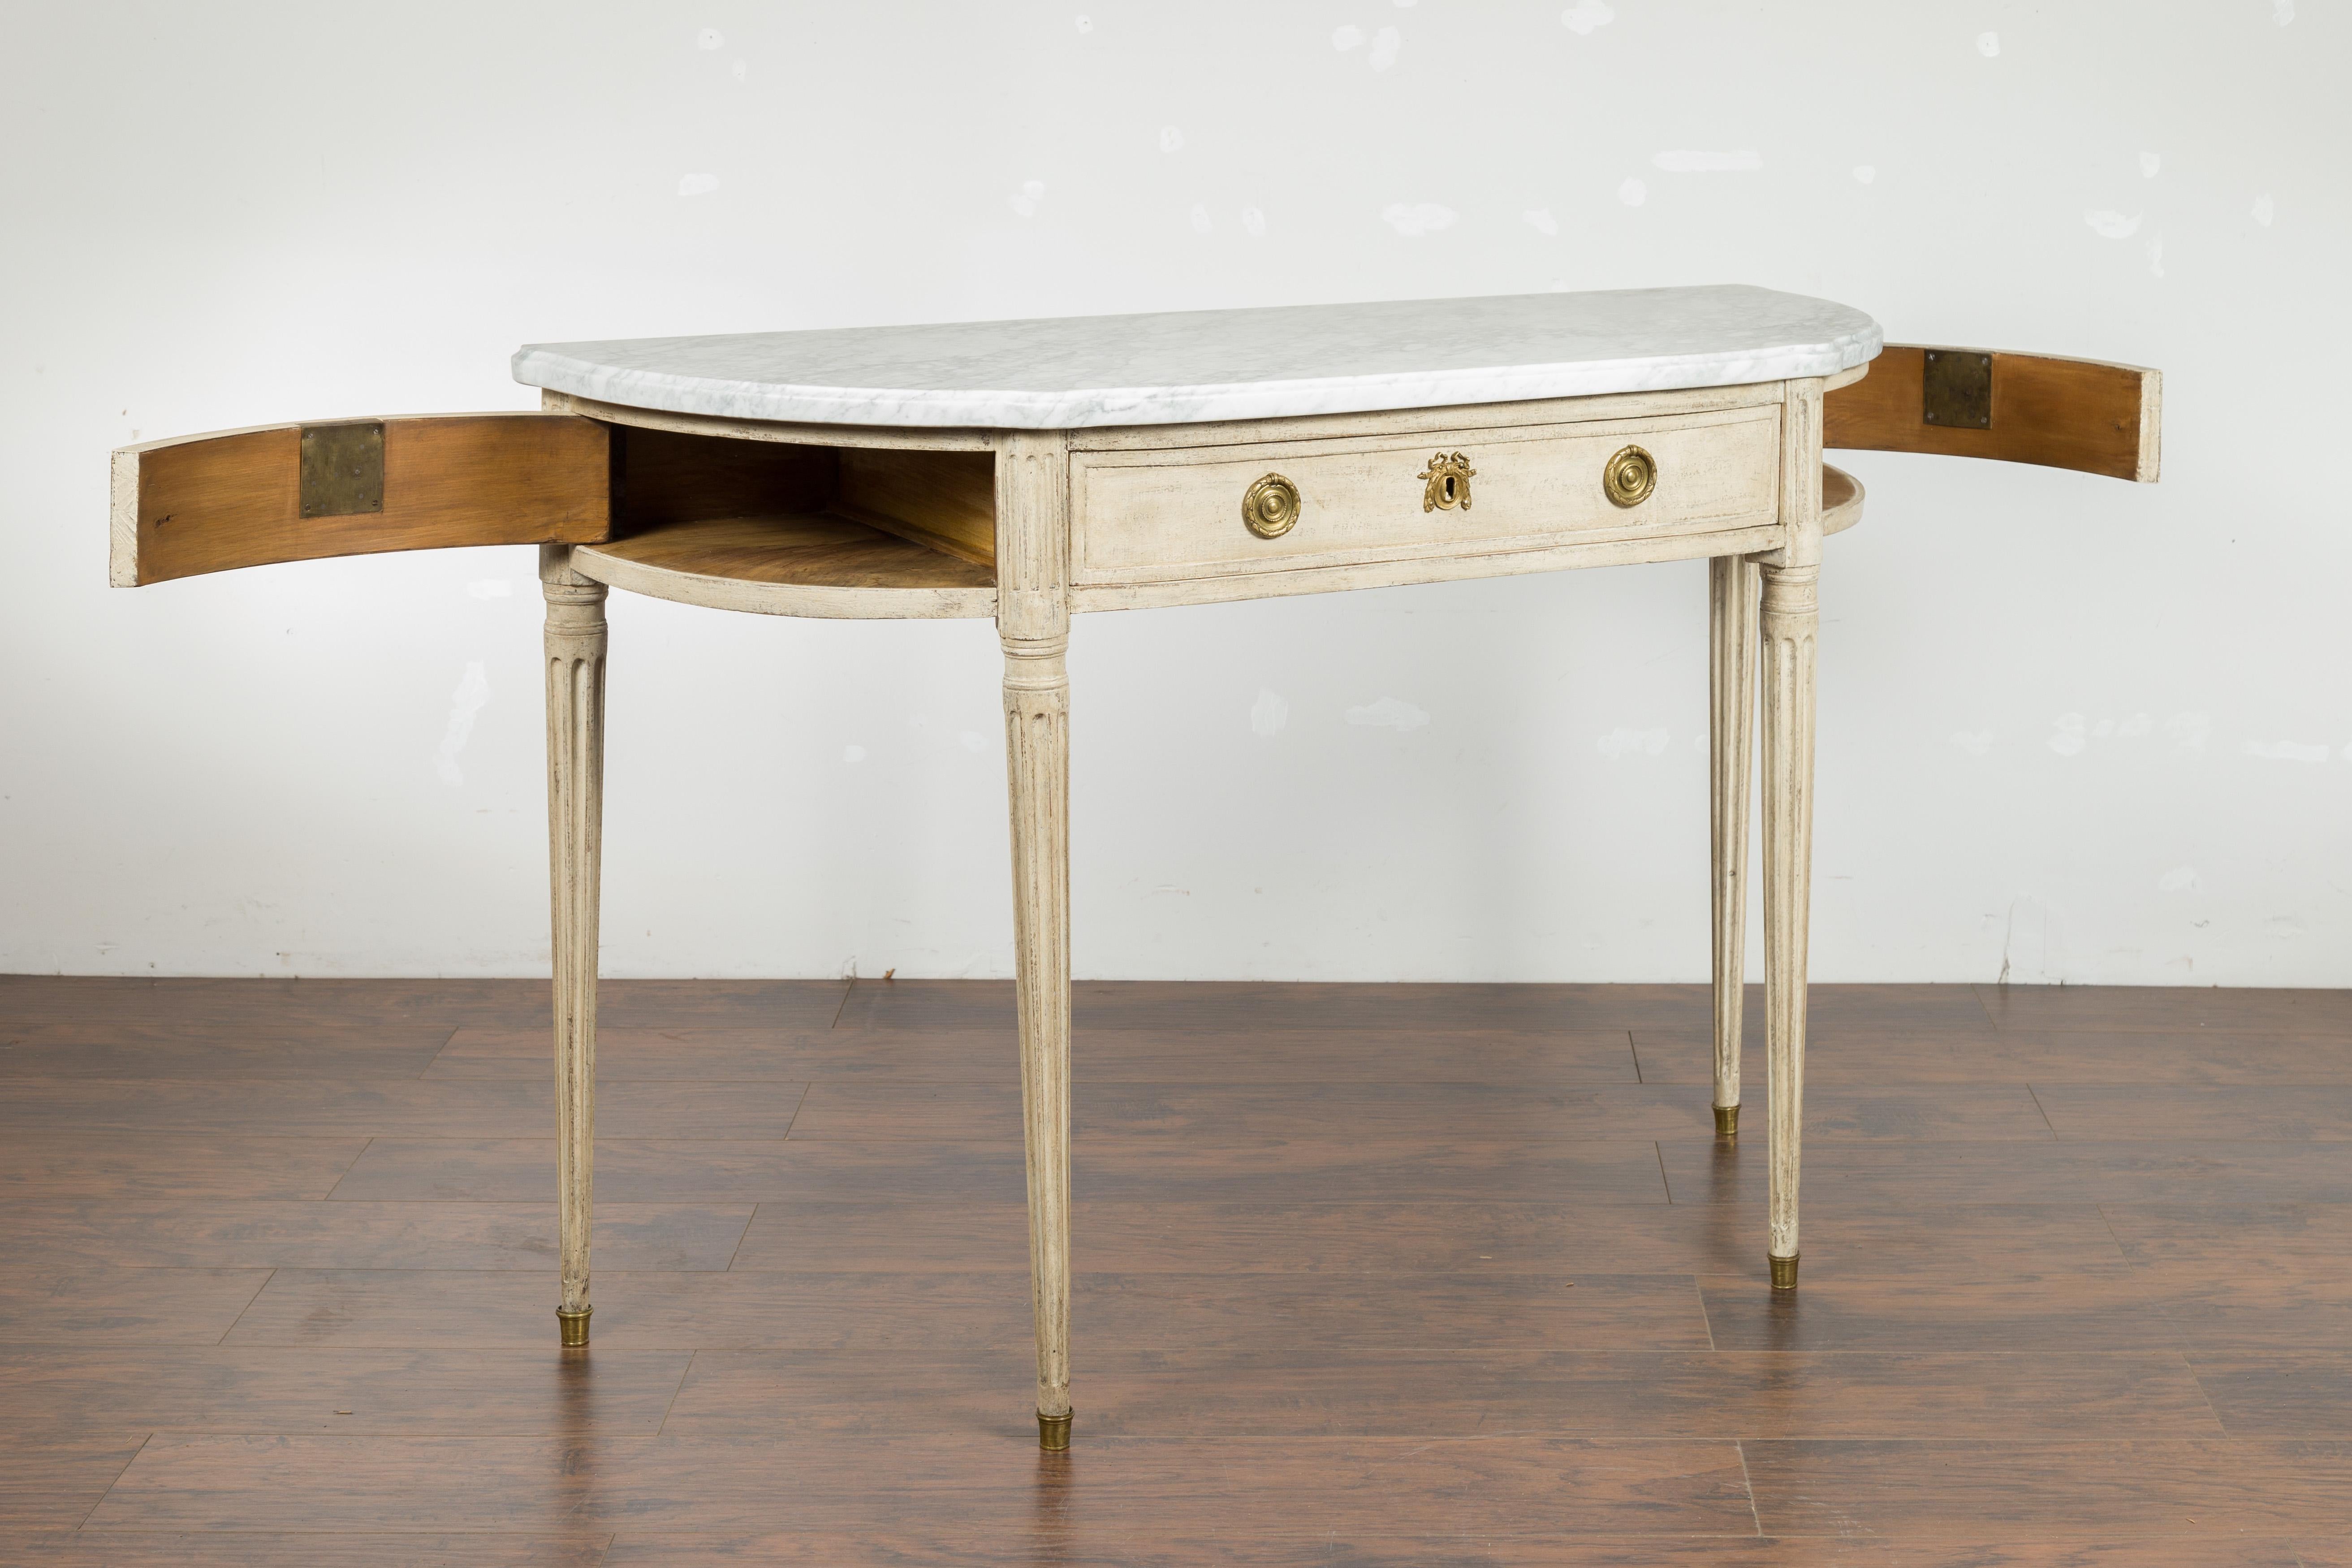 Pair of French 19th Century Neoclassical Style Demilune Tables with Marble Tops For Sale 9